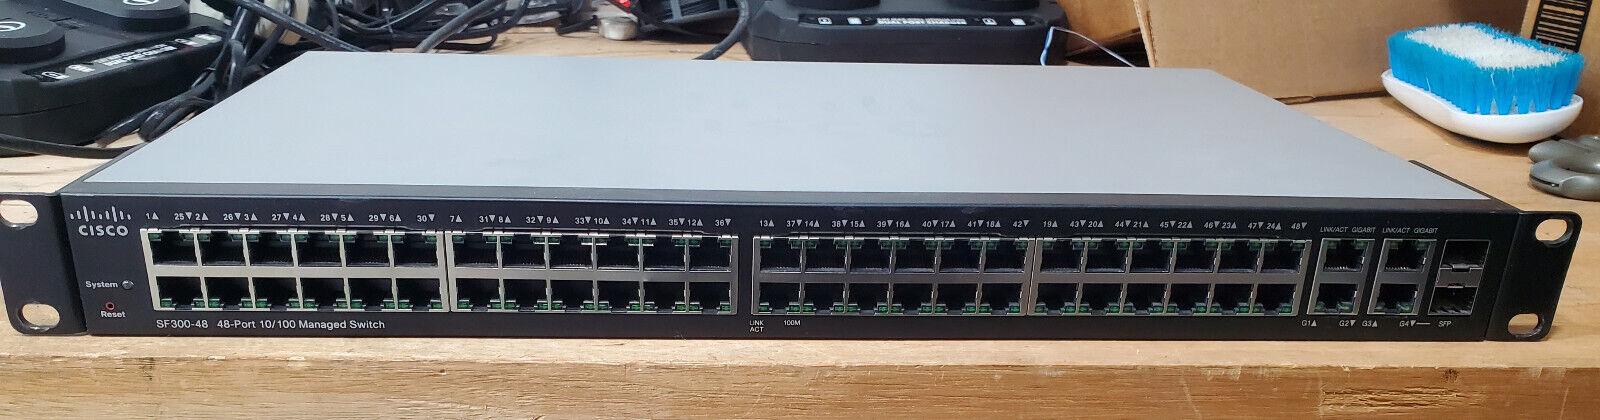 Cisco SF300-48 SRW248G4 48-port Switch Tested And Defaulted